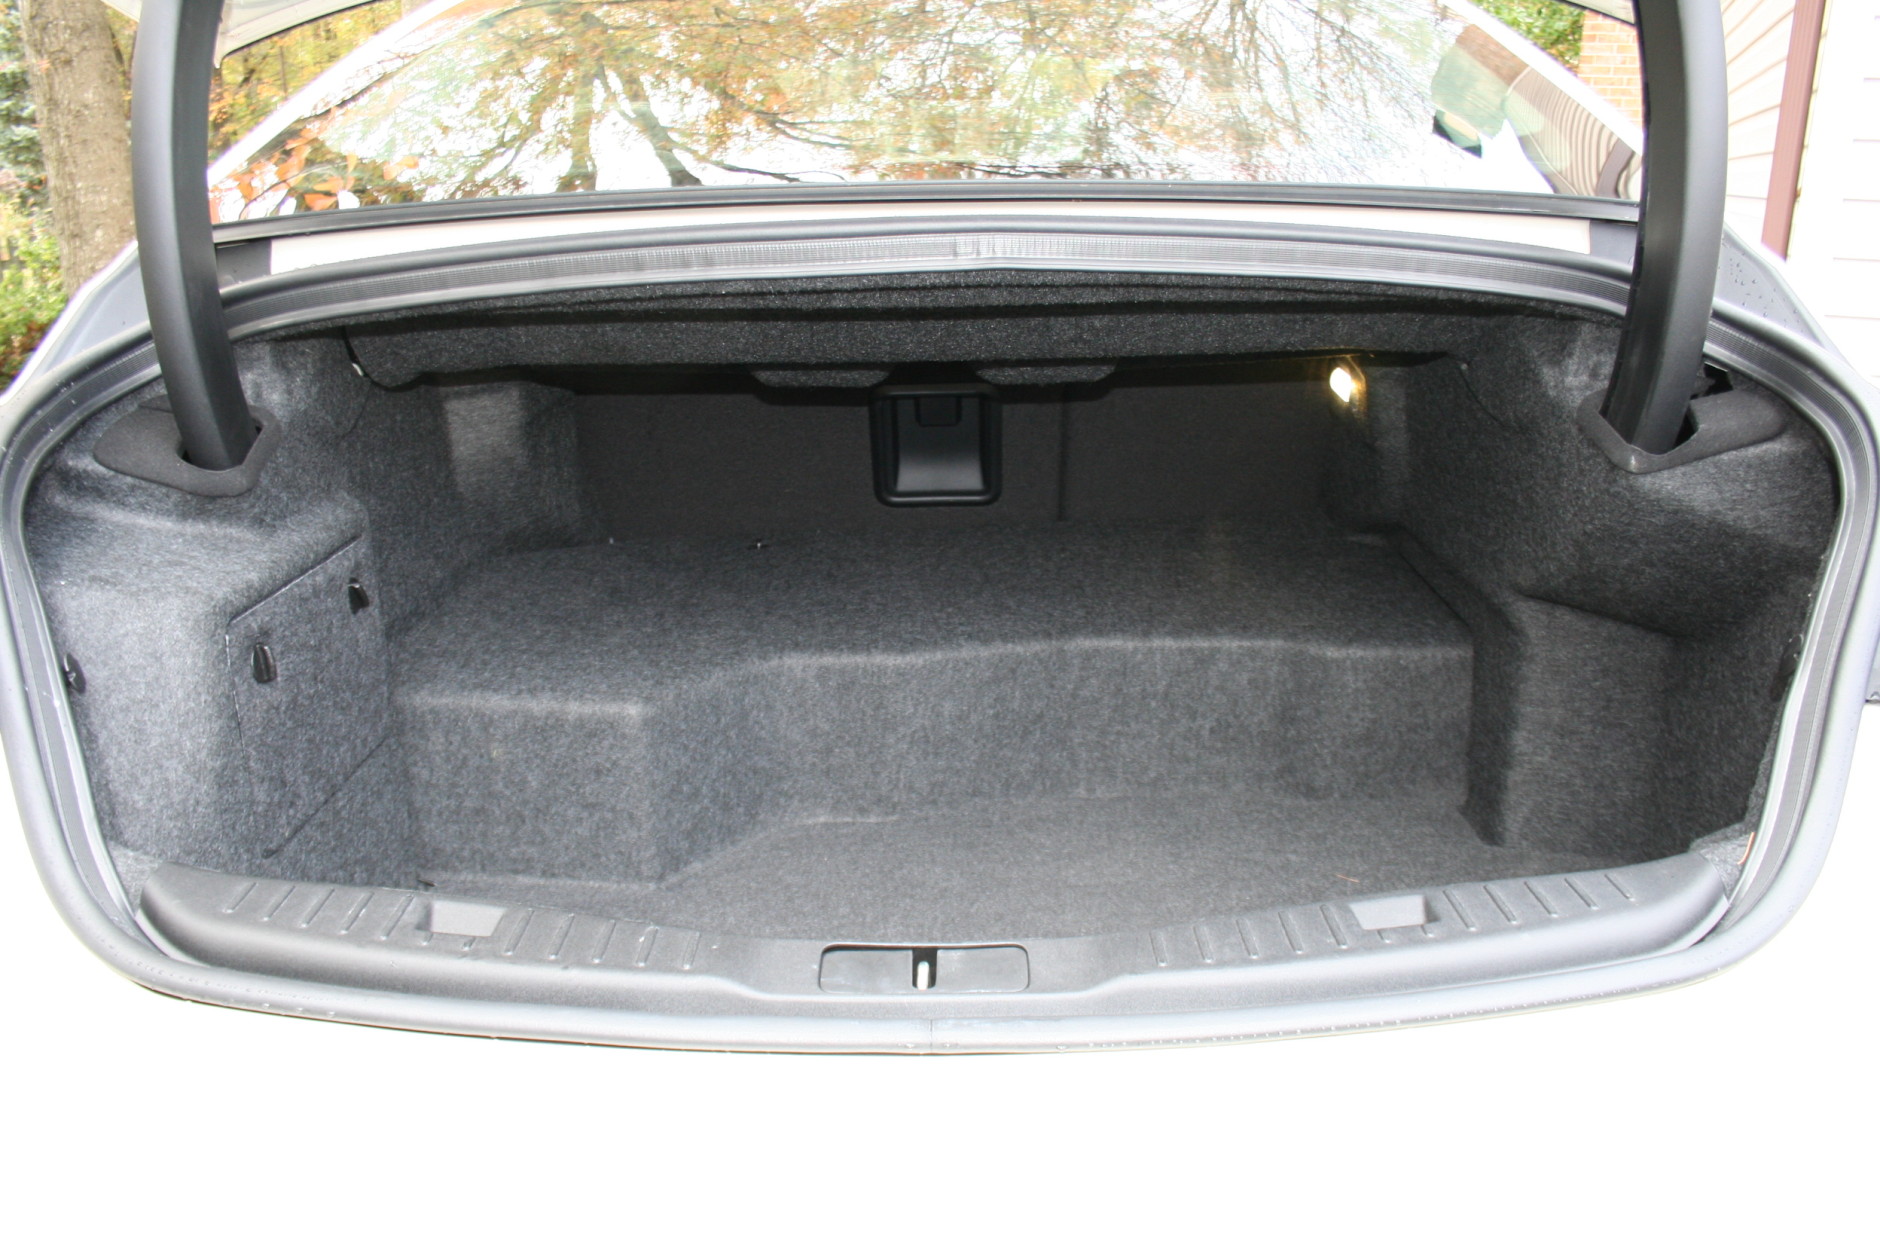 There is plenty of storage room in the trunk of the Lincoln MKZ. (WTOP/Mike Parris)